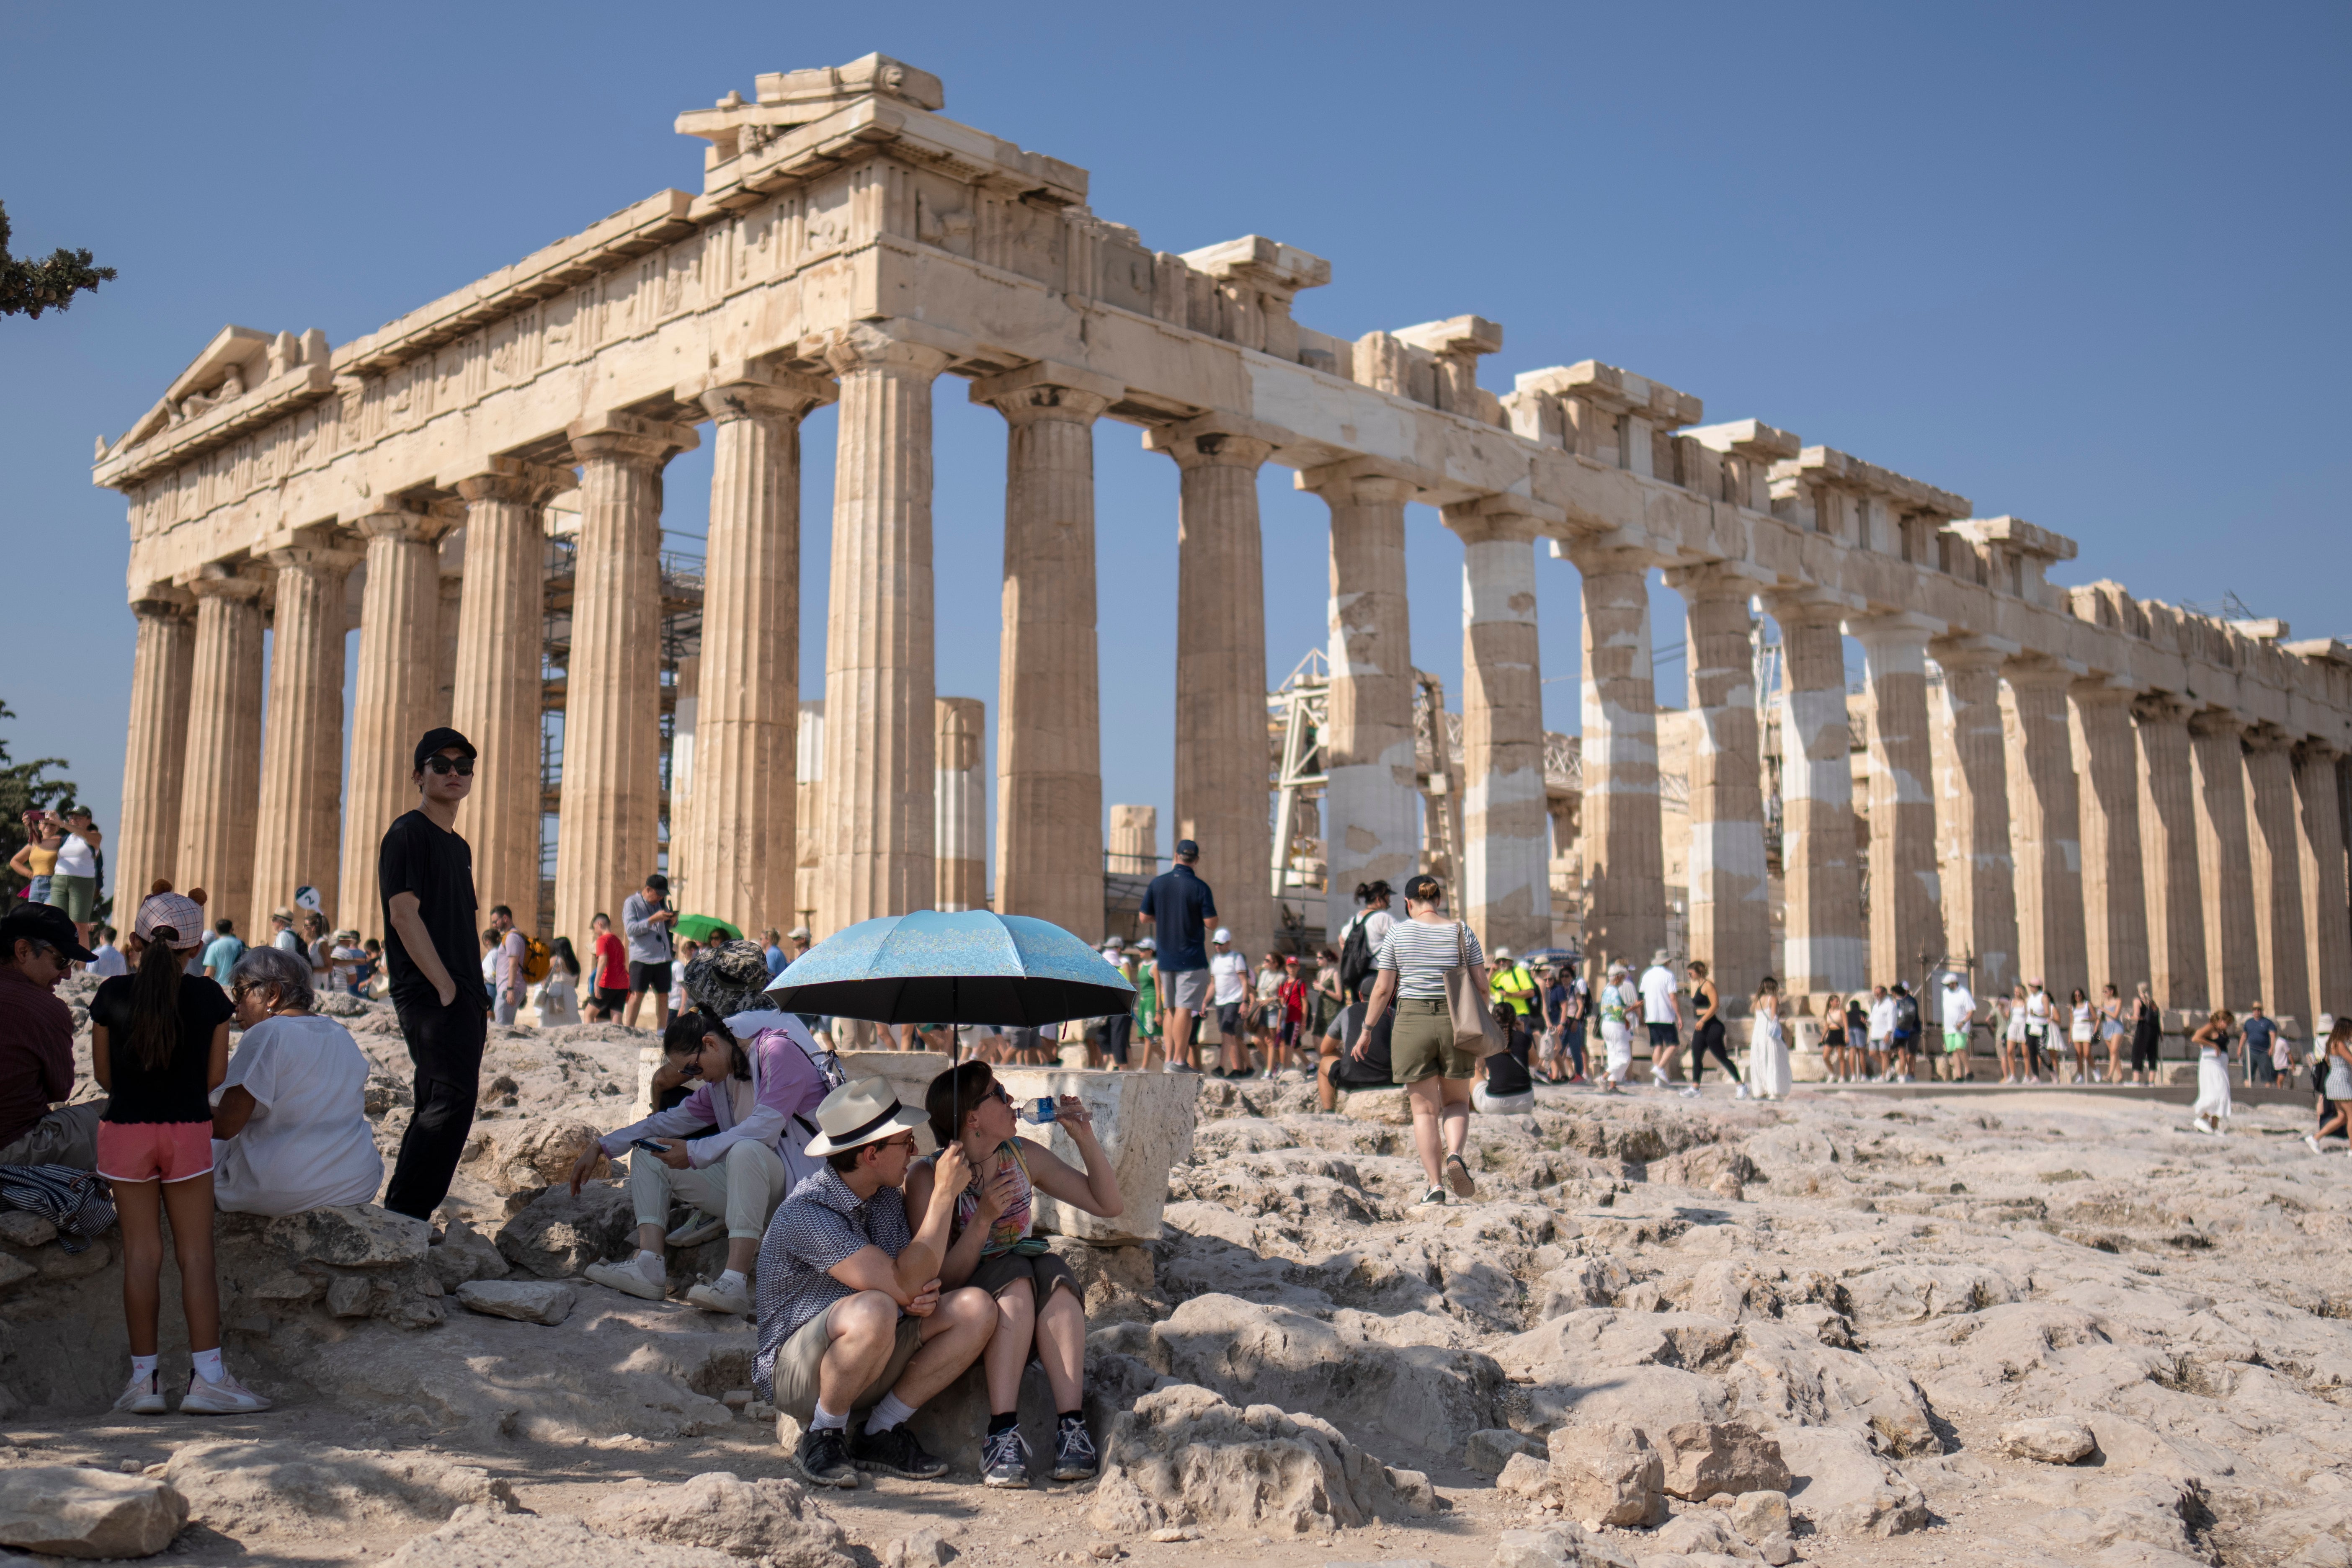 The Acropolis is limiting visitors